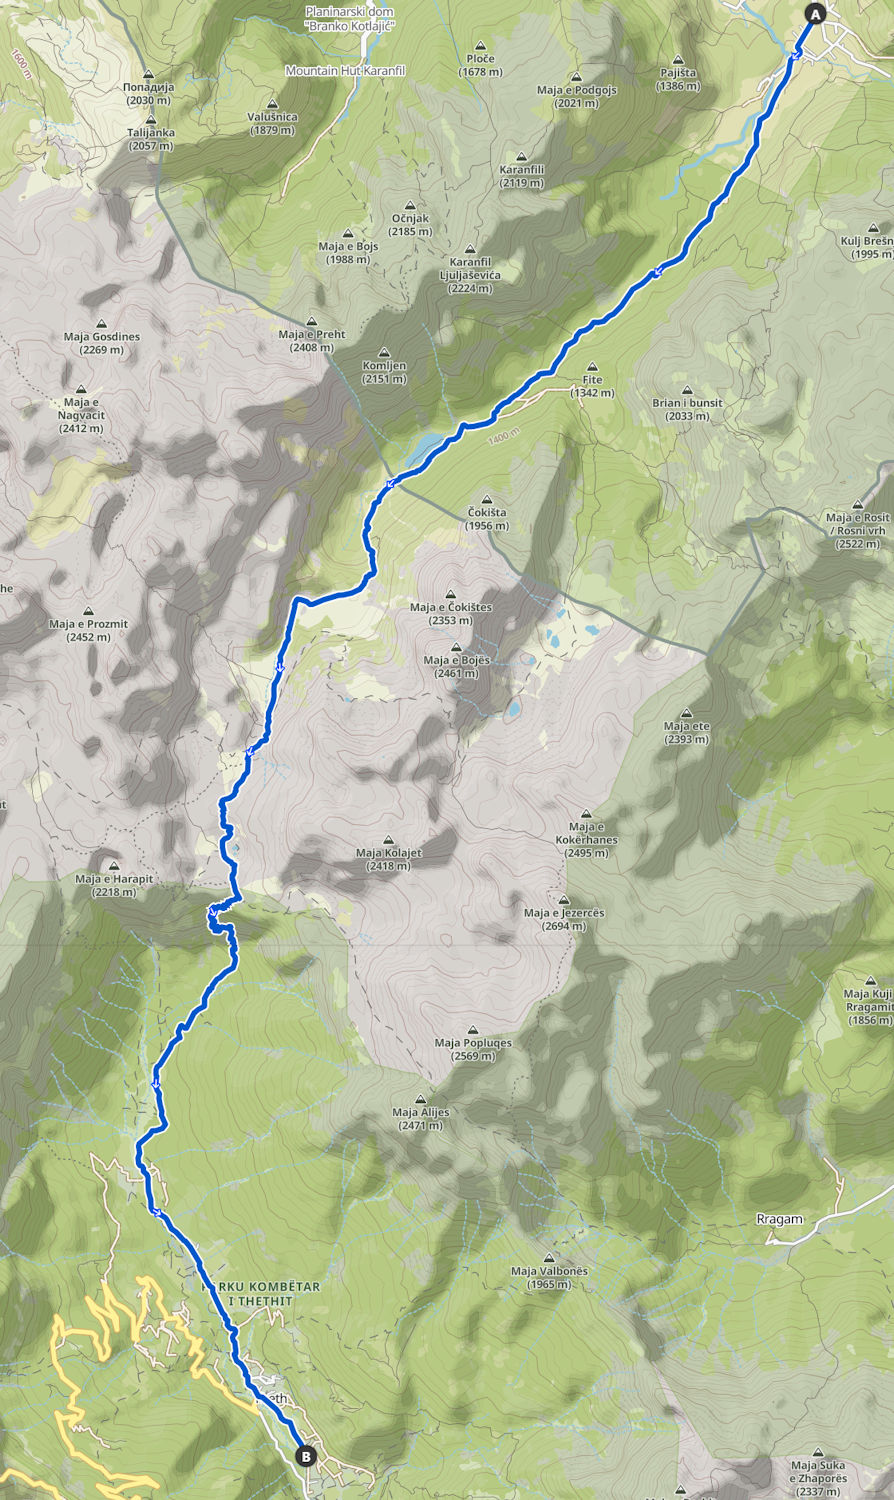 Trail map of the Vusanje to Theth segment of the Peaks of the Balkans trail